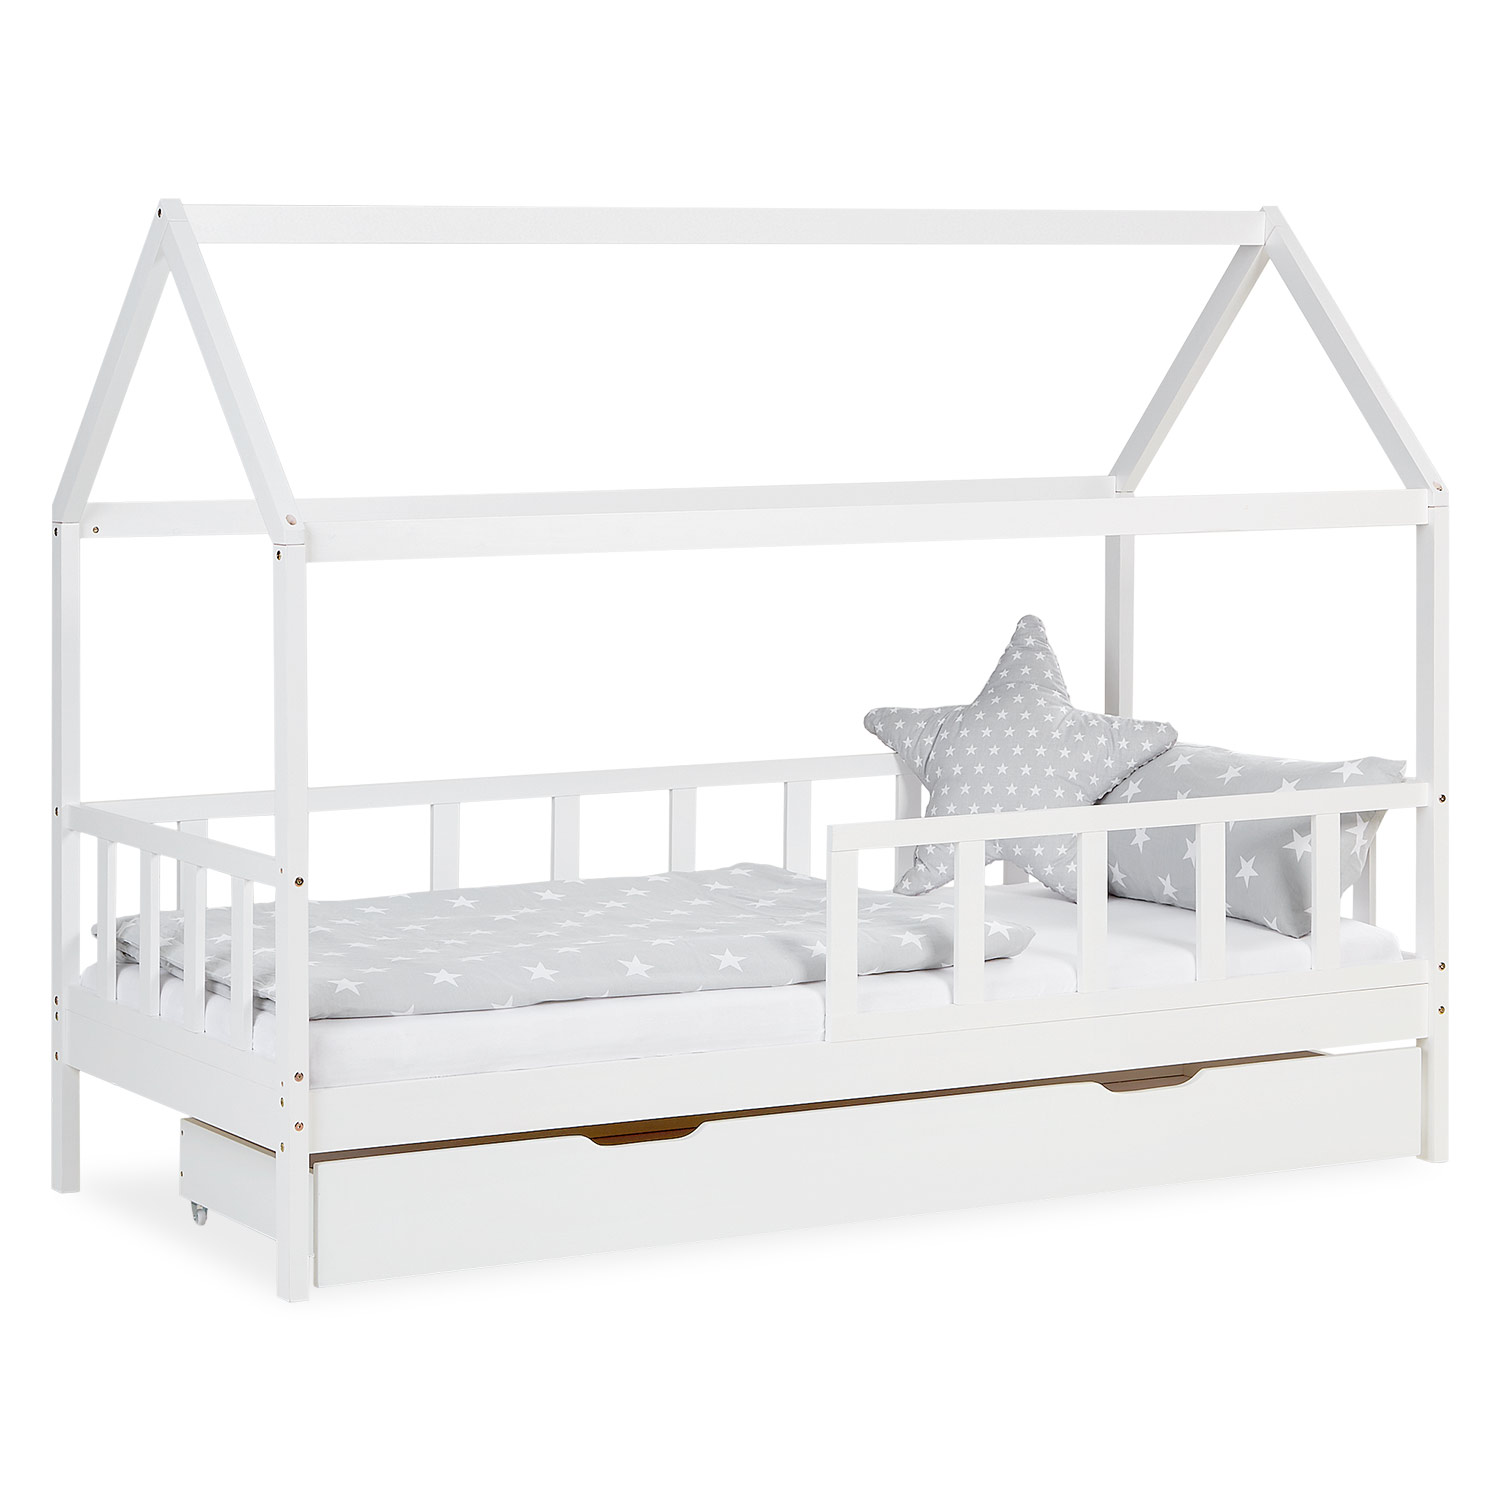 Children's Bed 90x200 cm House Bed with Drawer Barriers Childrens Single Bed Treehouse Bed Slatted Frame